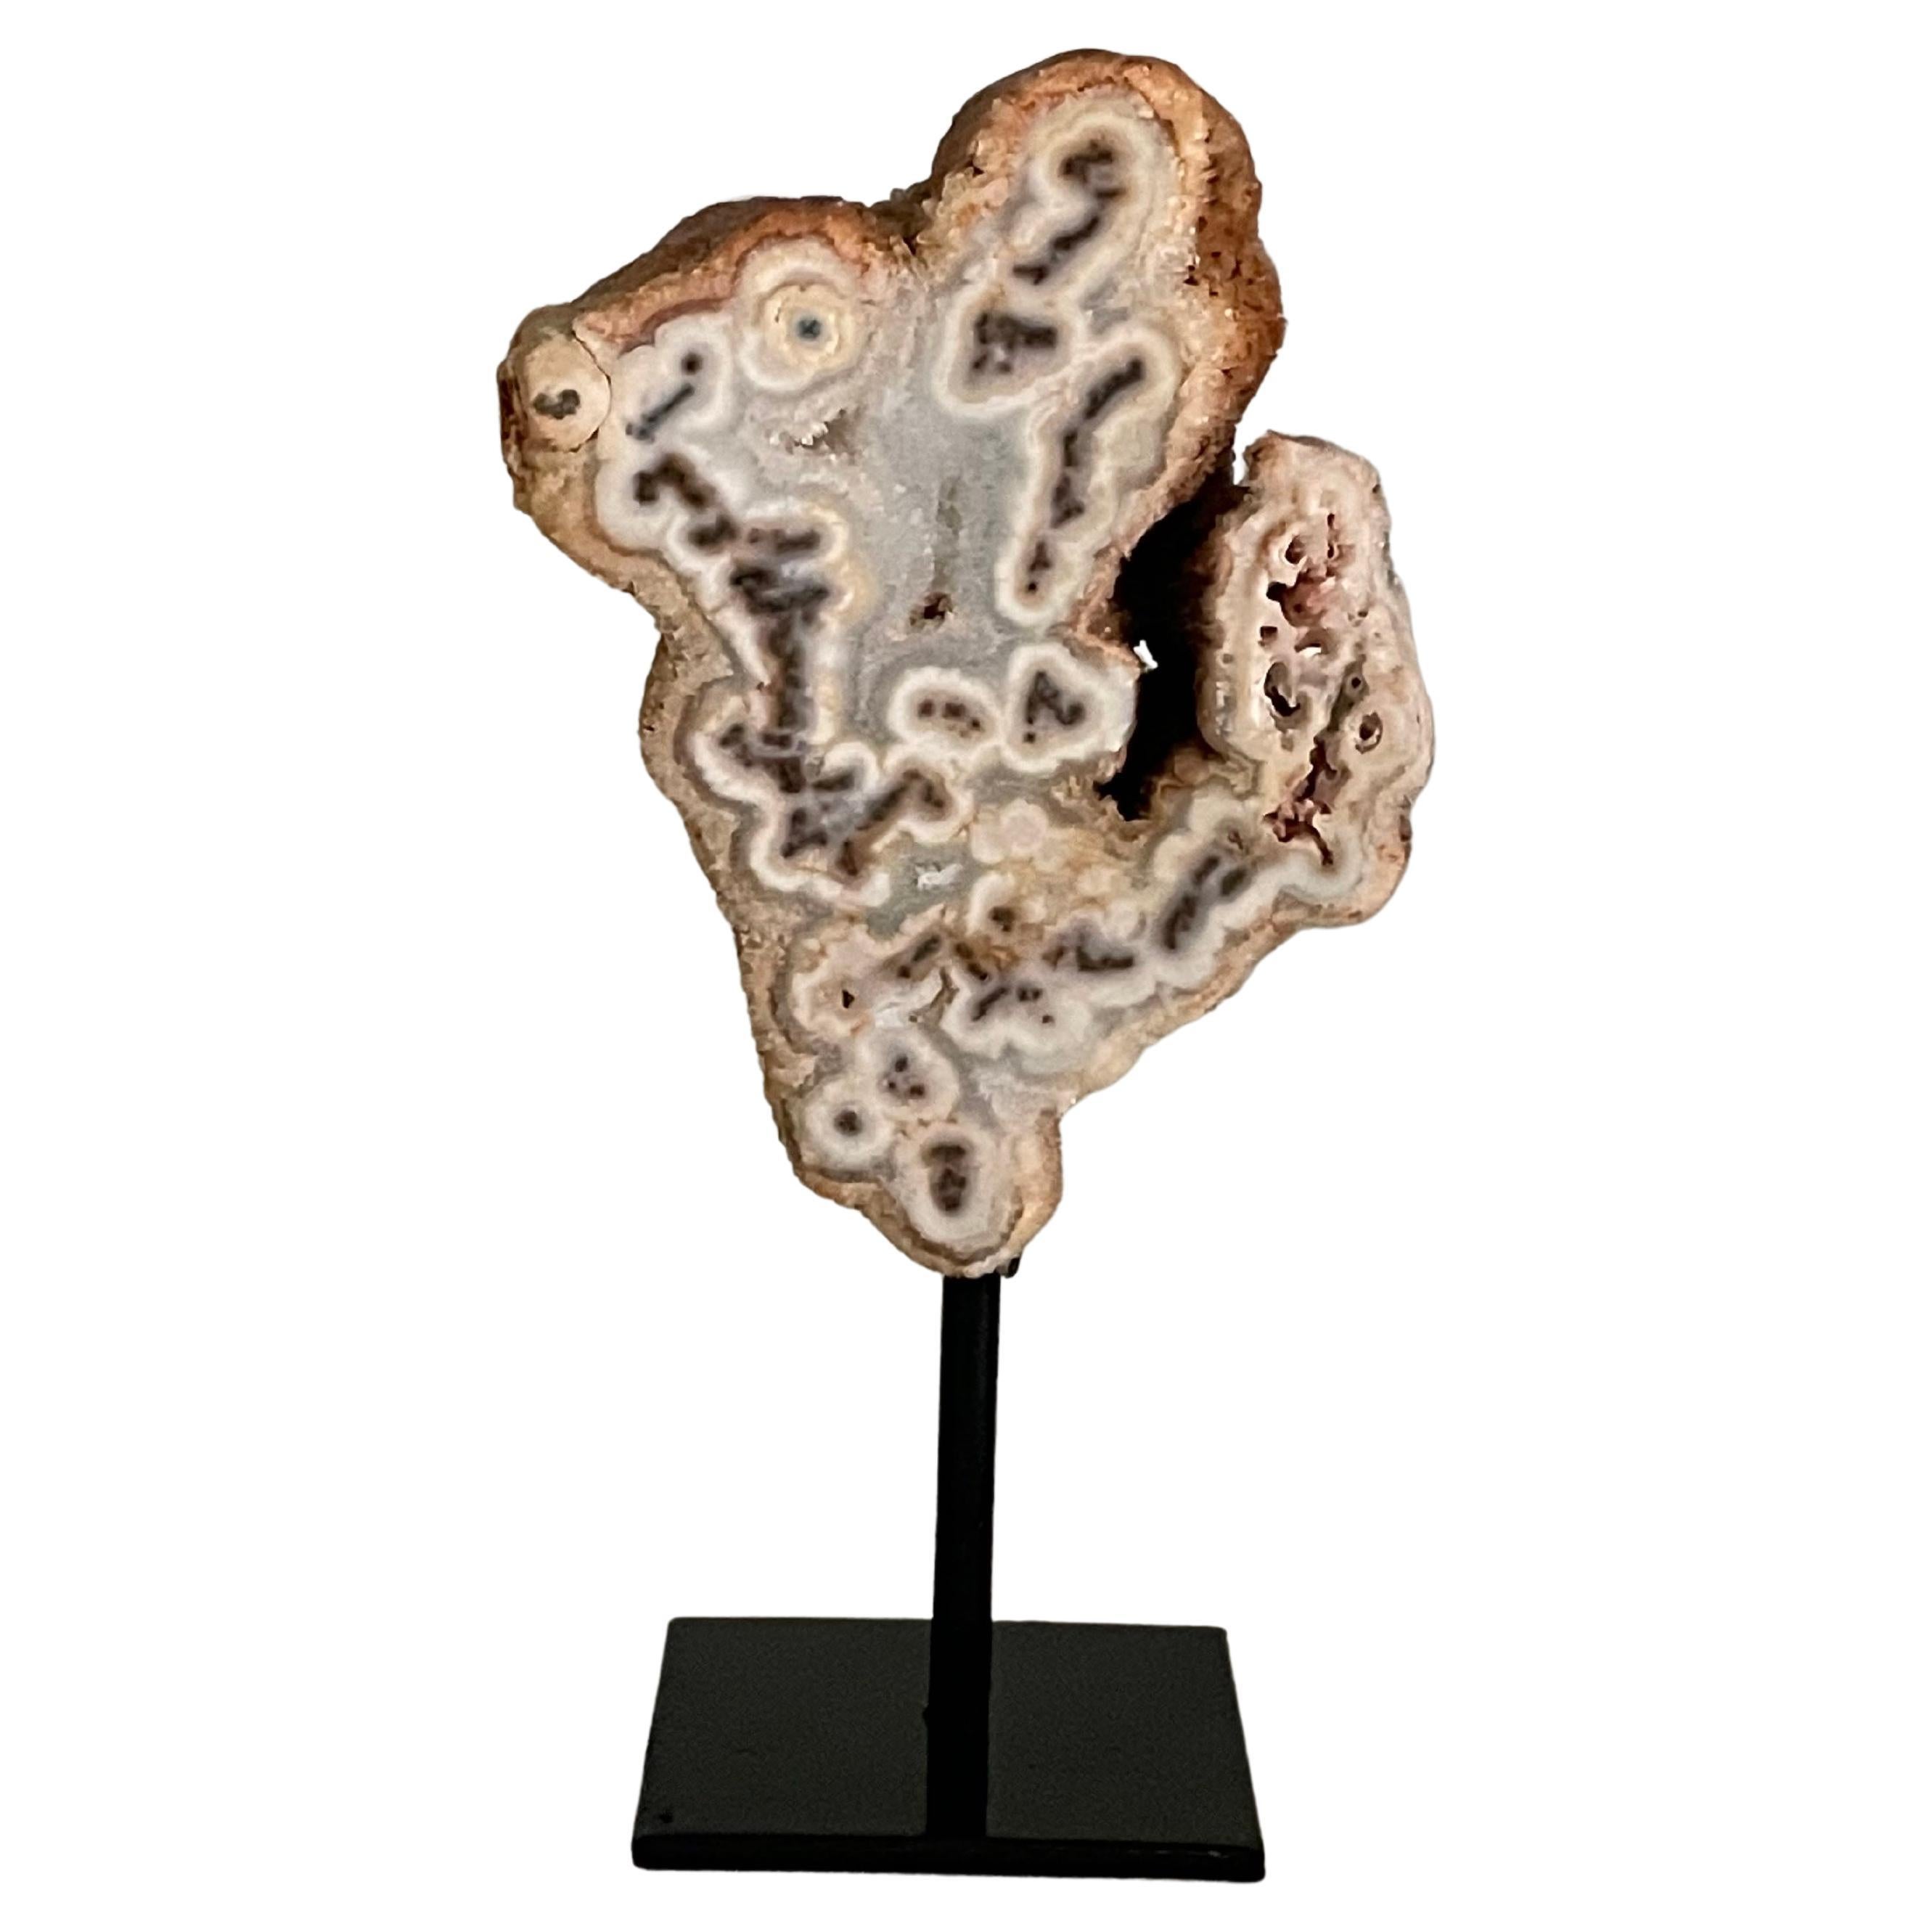 Tan Extra Small Tree Agate on Stand, Brazil, Prehistoric